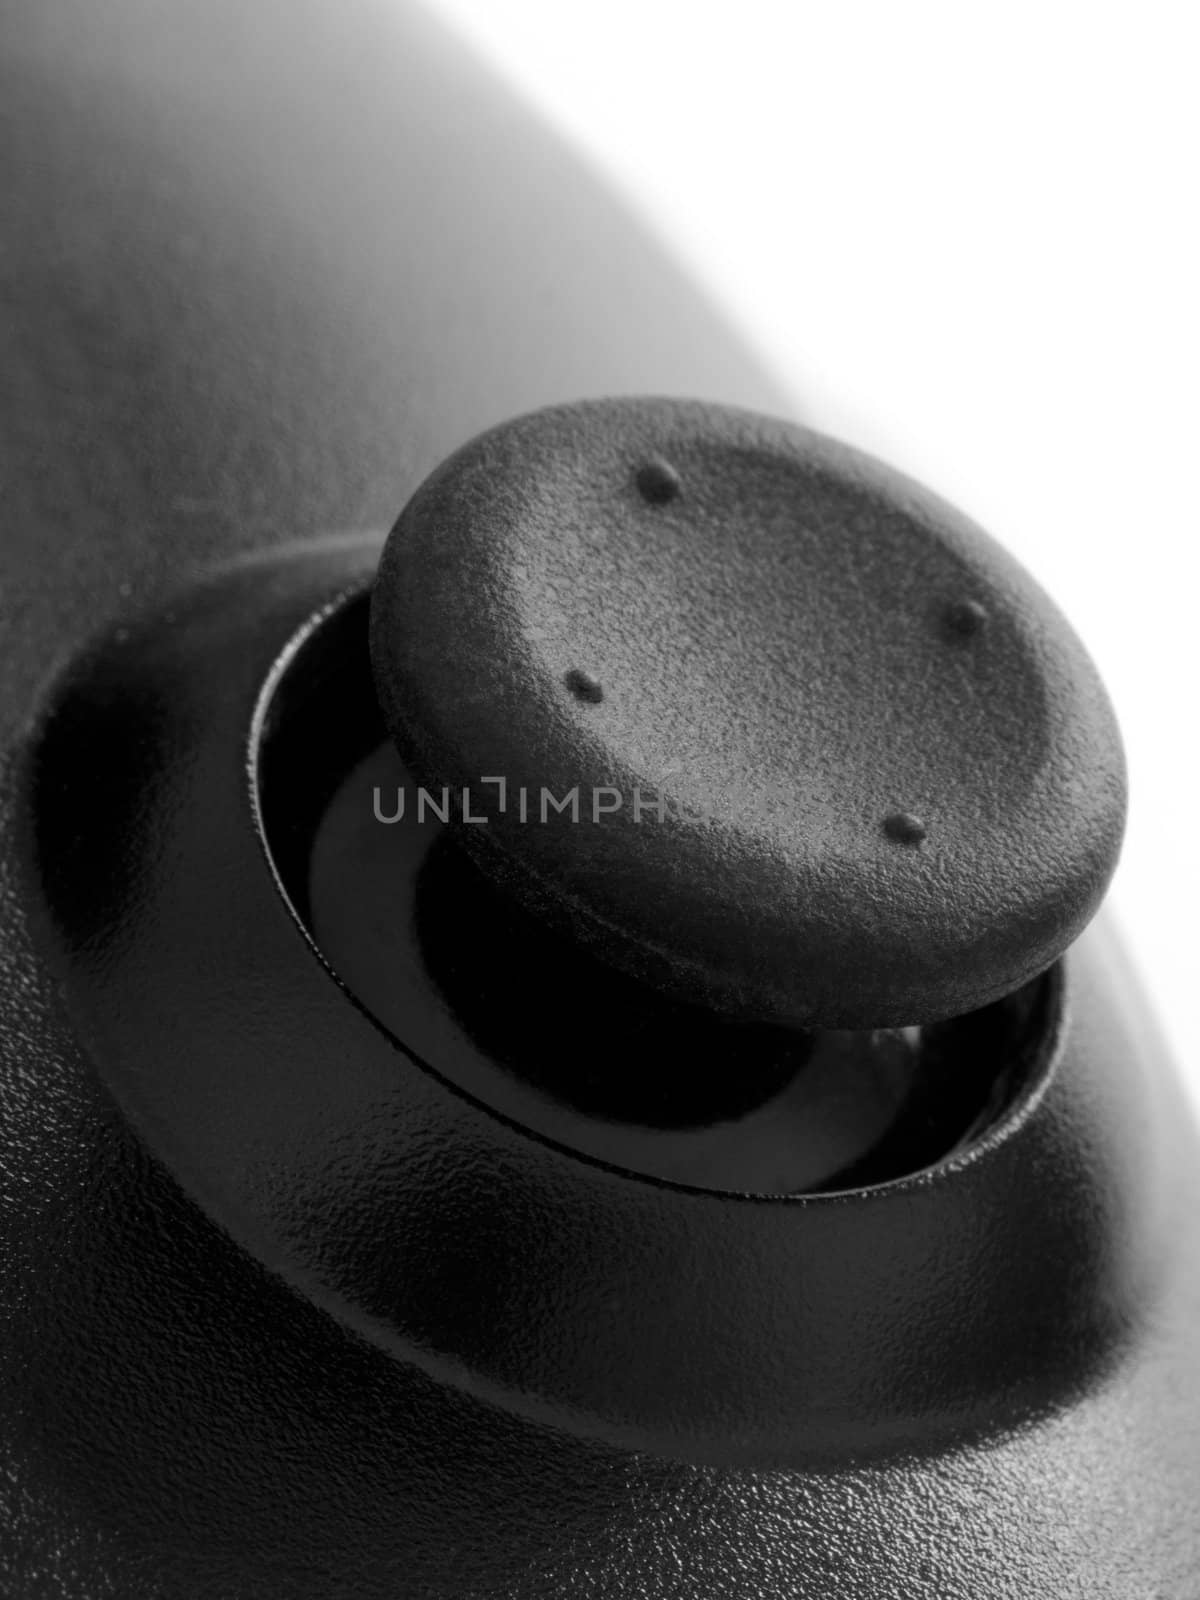 close up of a game controller thumbpad